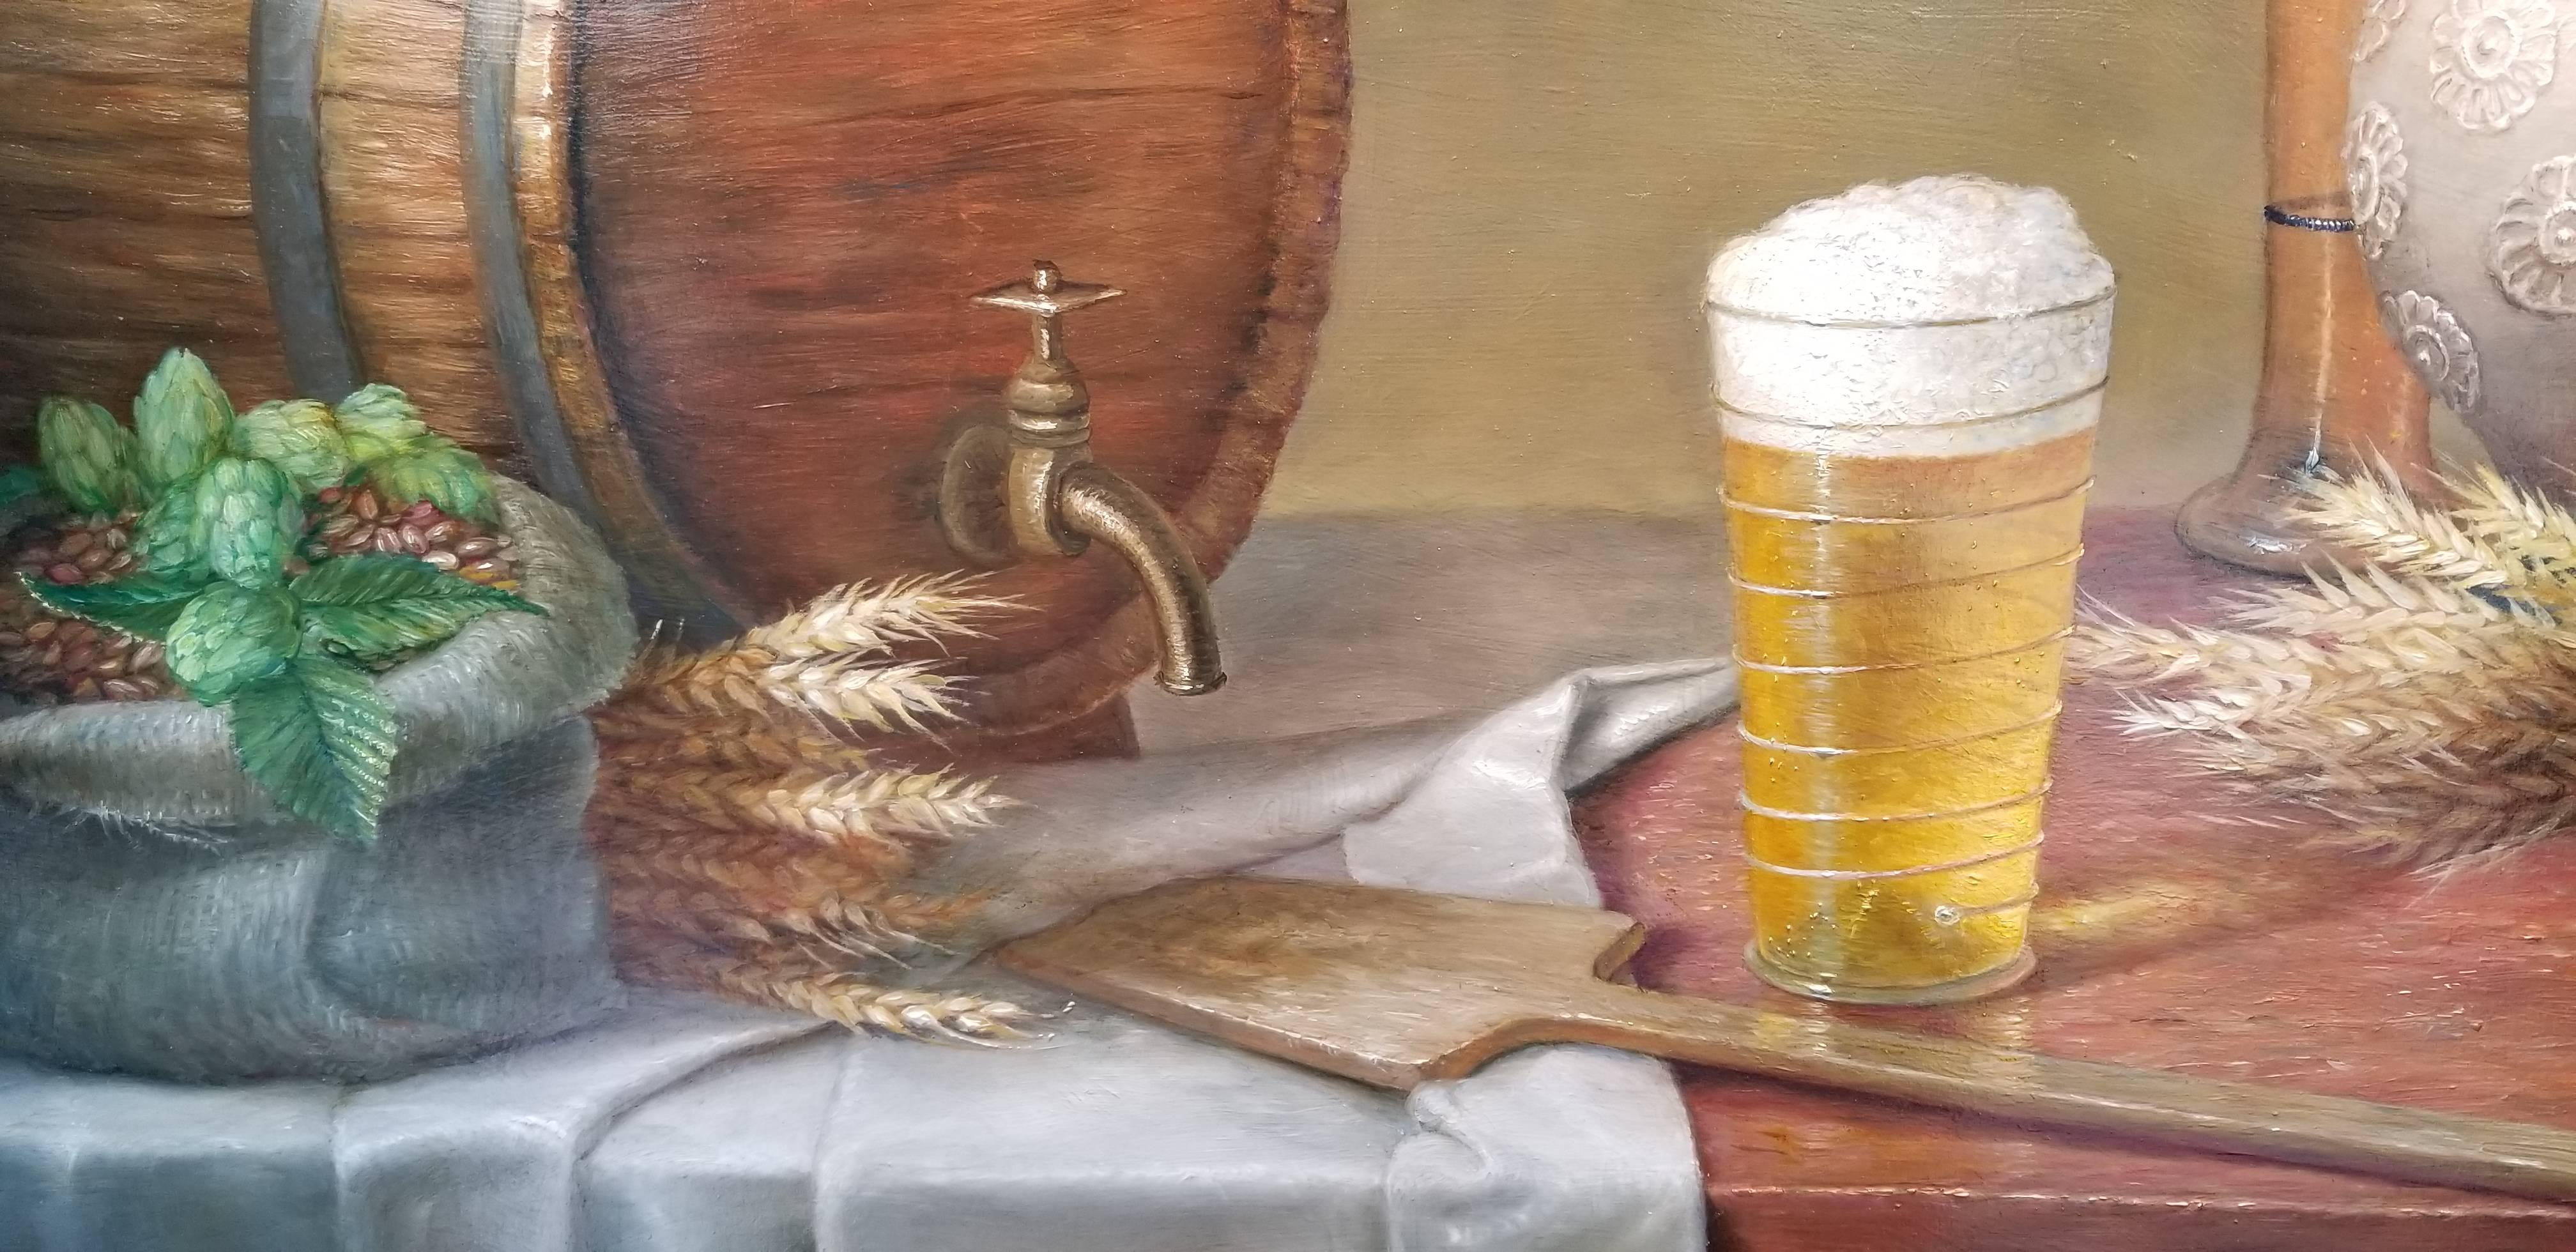 The Brewery - Painting by Paul van Ernich